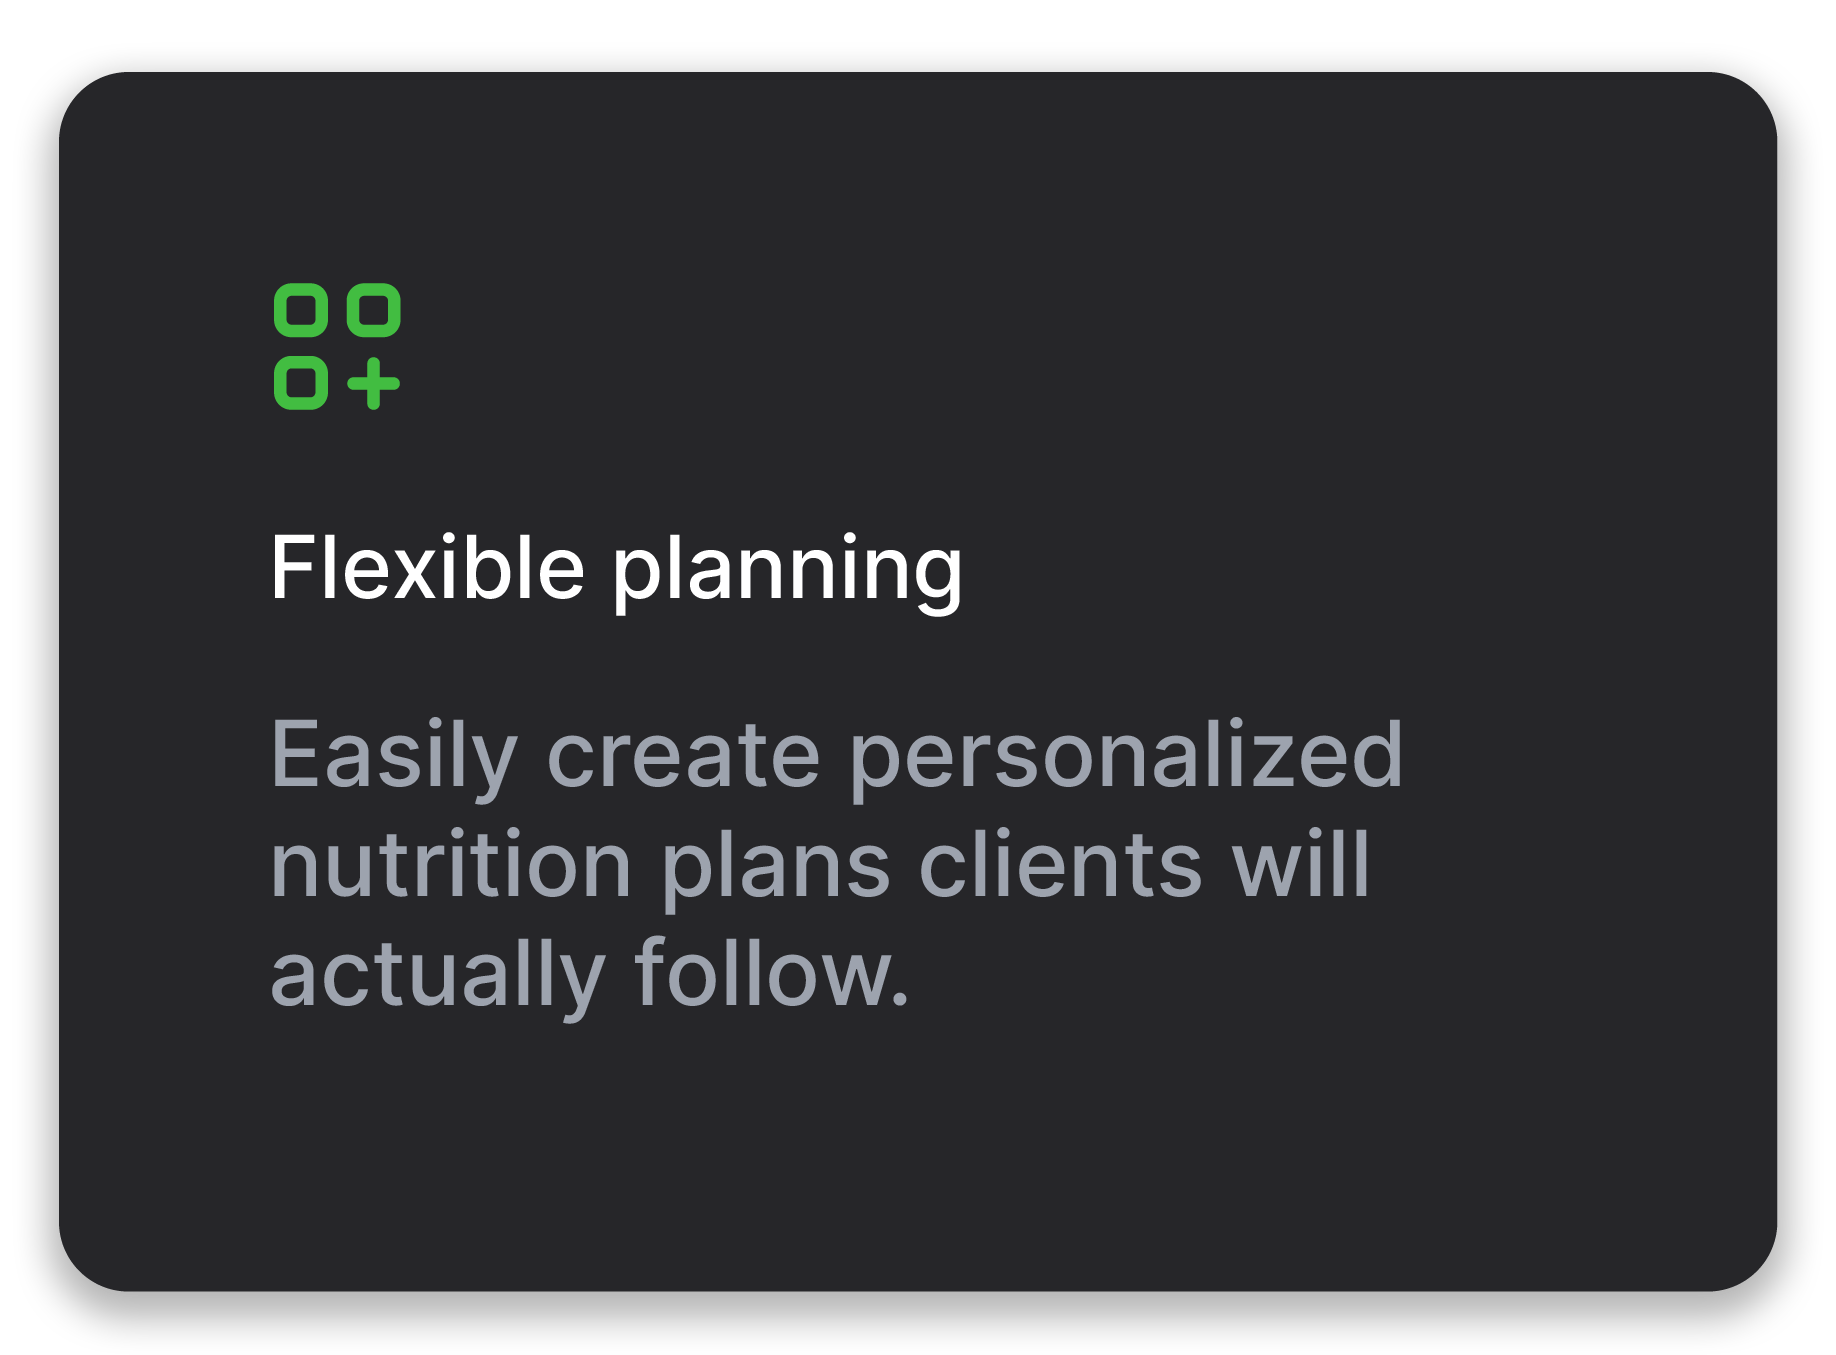 Flexible planning - Easily create personalized nutrition plans clients will actually follow.